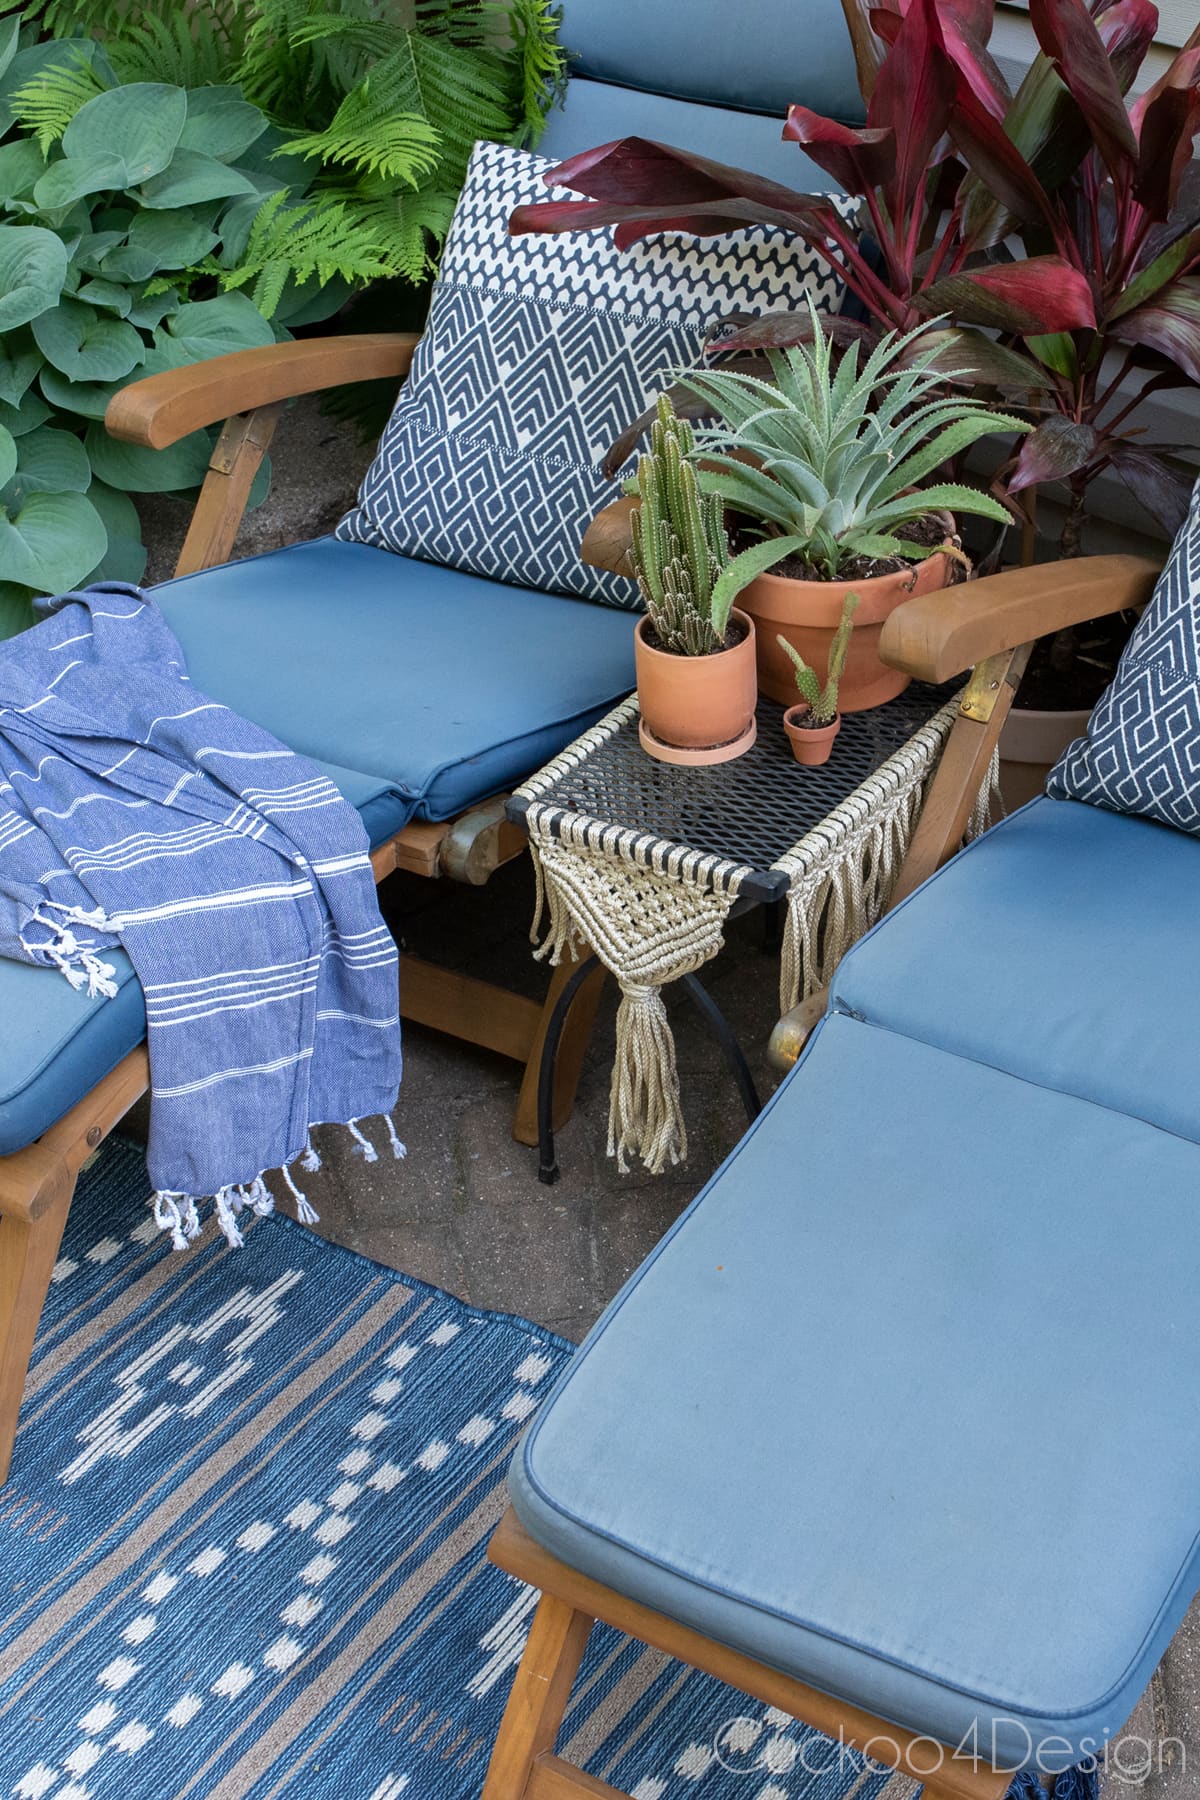 metal mesh patio table with macrame between two sun lounge chairs with blue accents and a lot of plants in terracotta pots